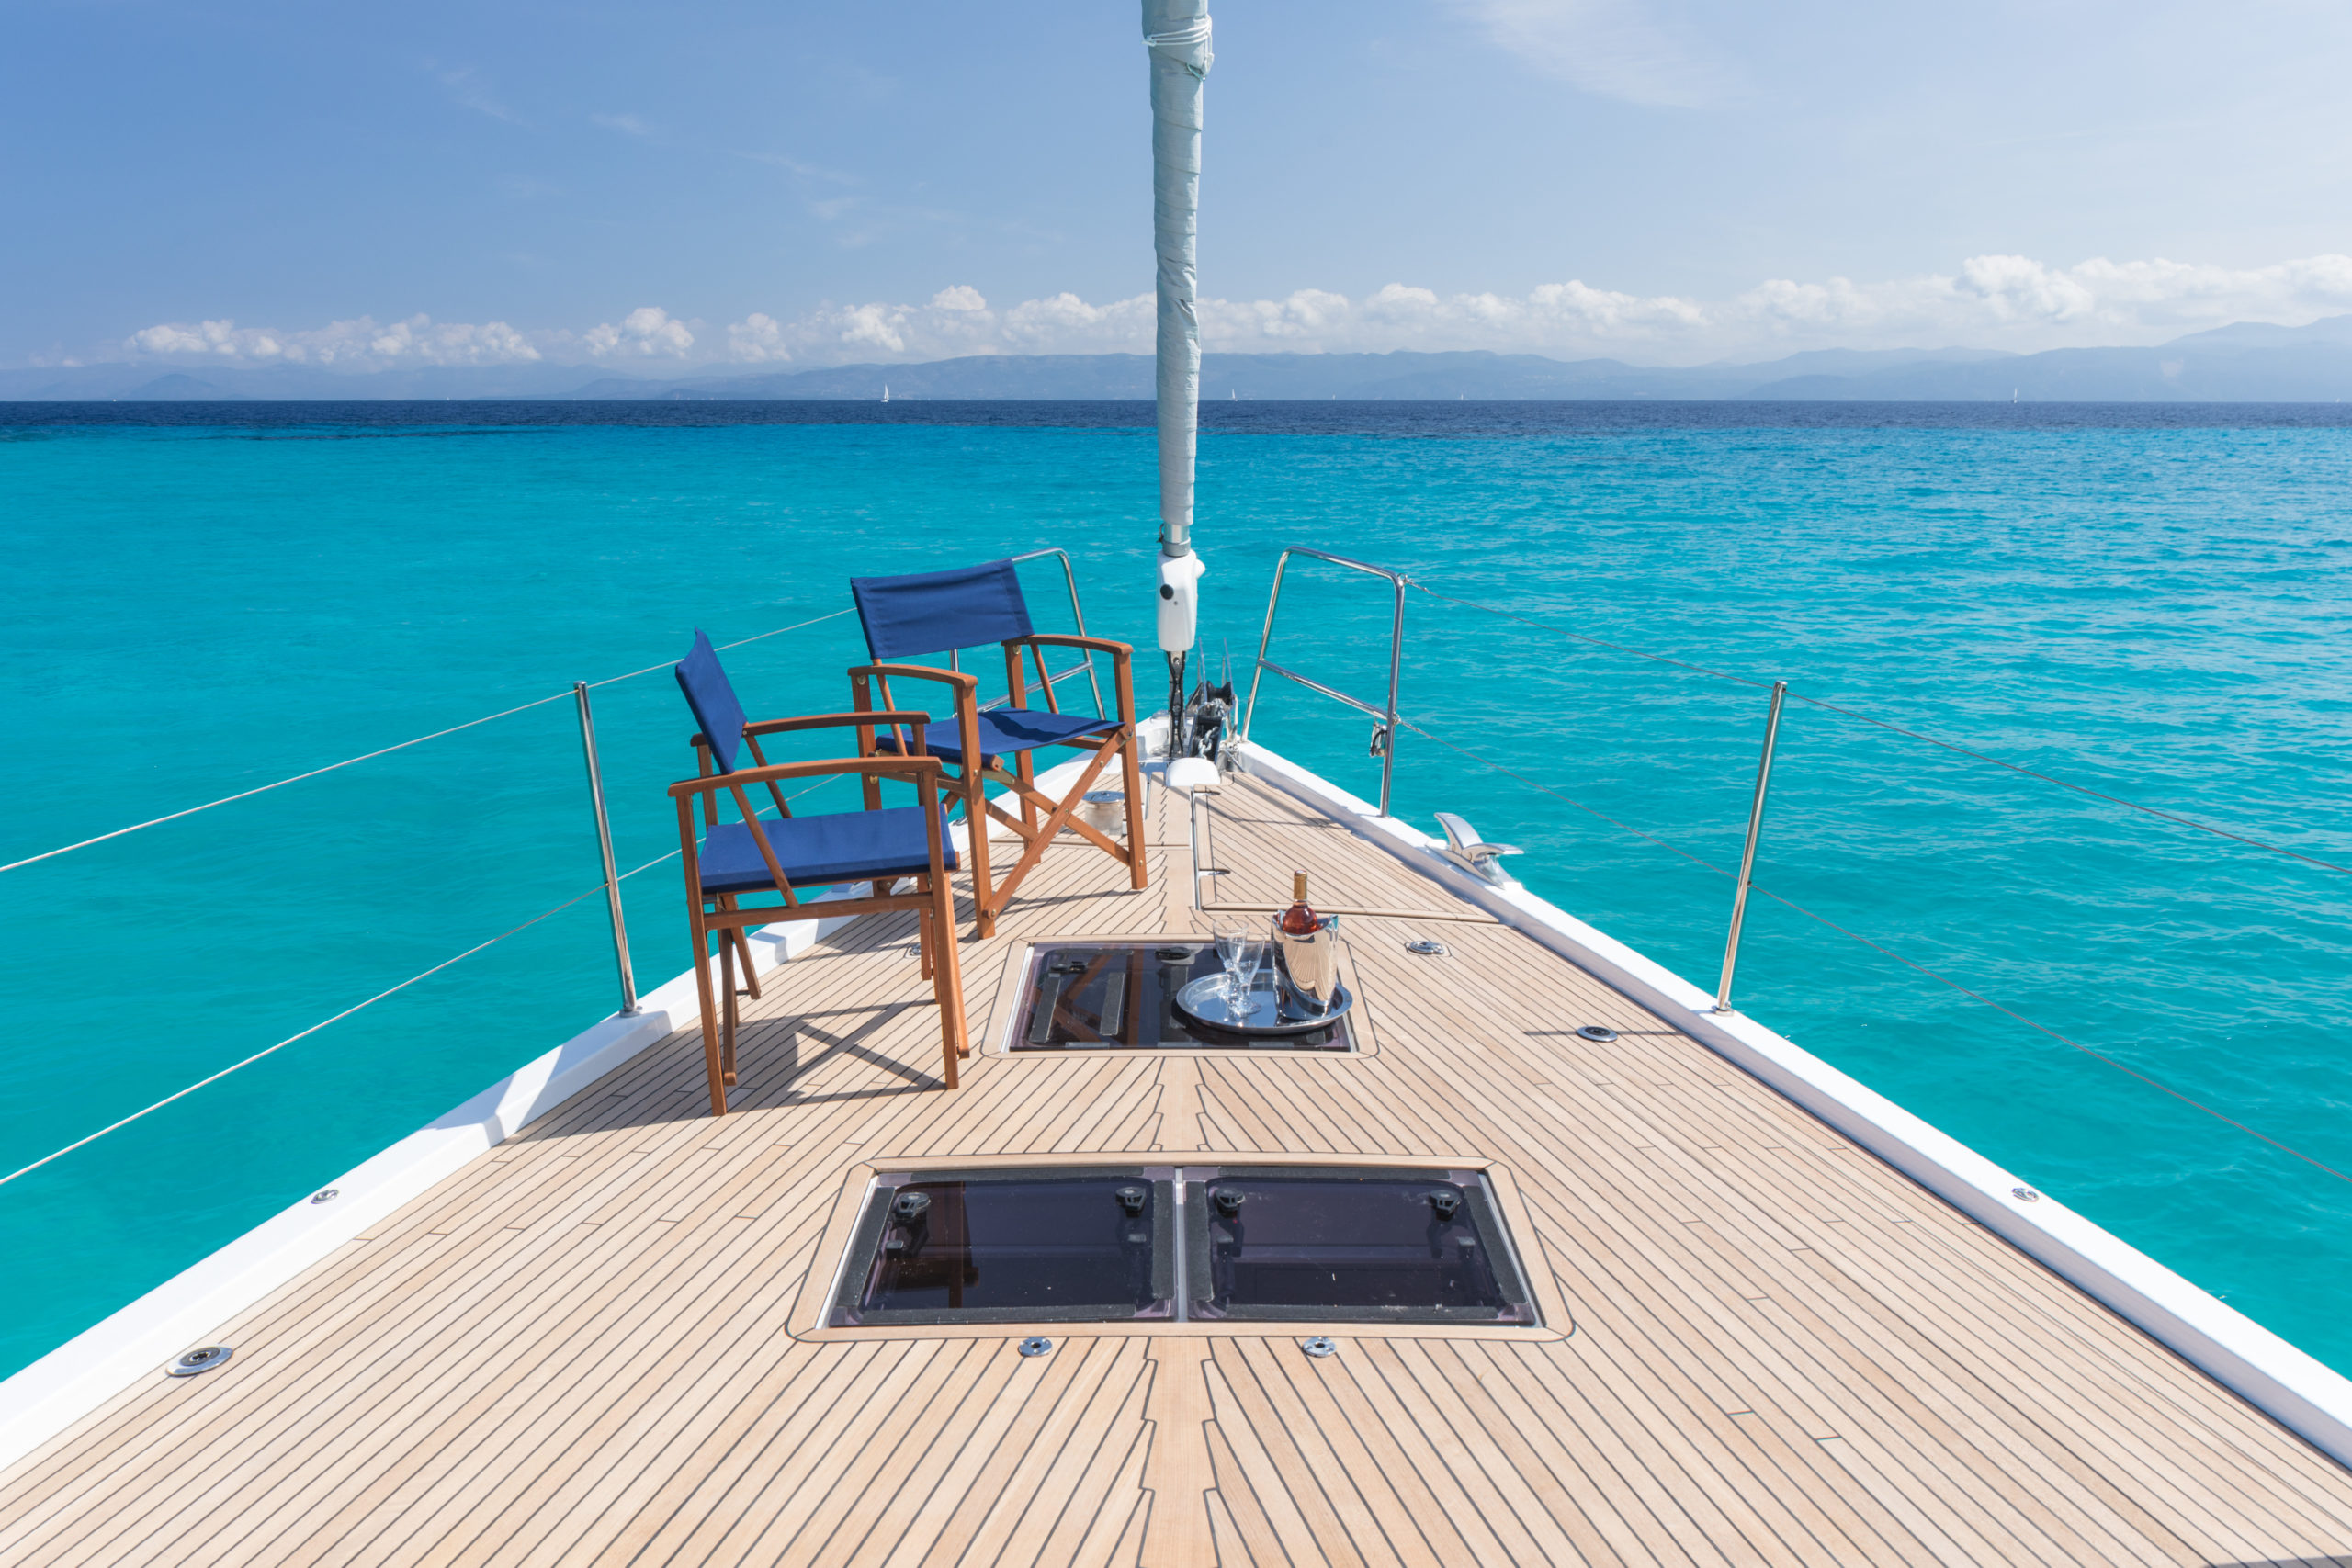 Lunous Yacht's foredeck is perfect for cocktails